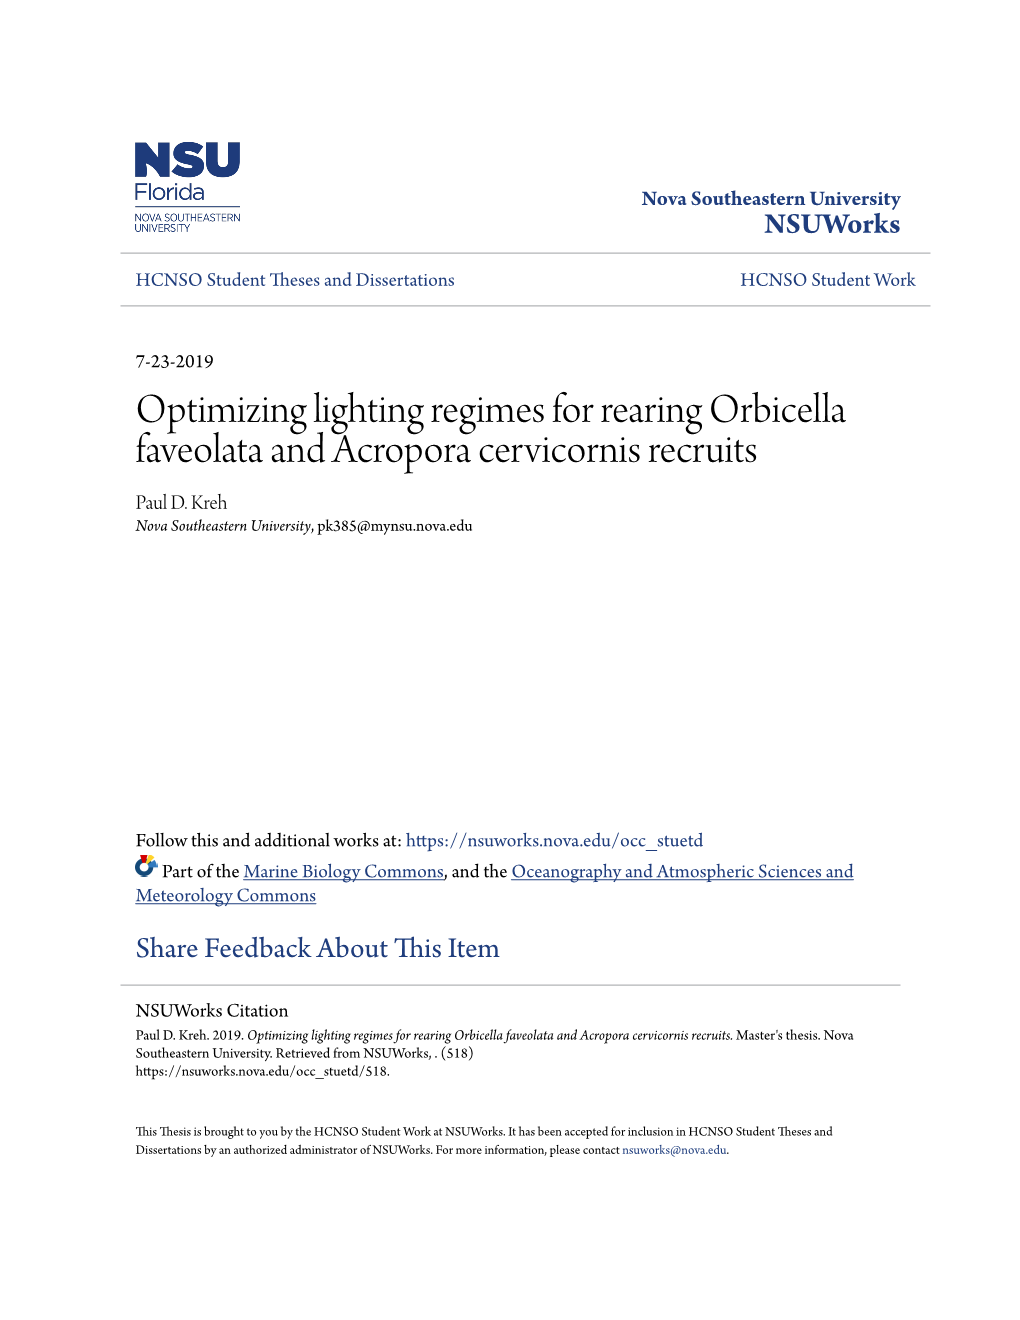 Optimizing Lighting Regimes for Rearing Orbicella Faveolata and Acropora Cervicornis Recruits Paul D